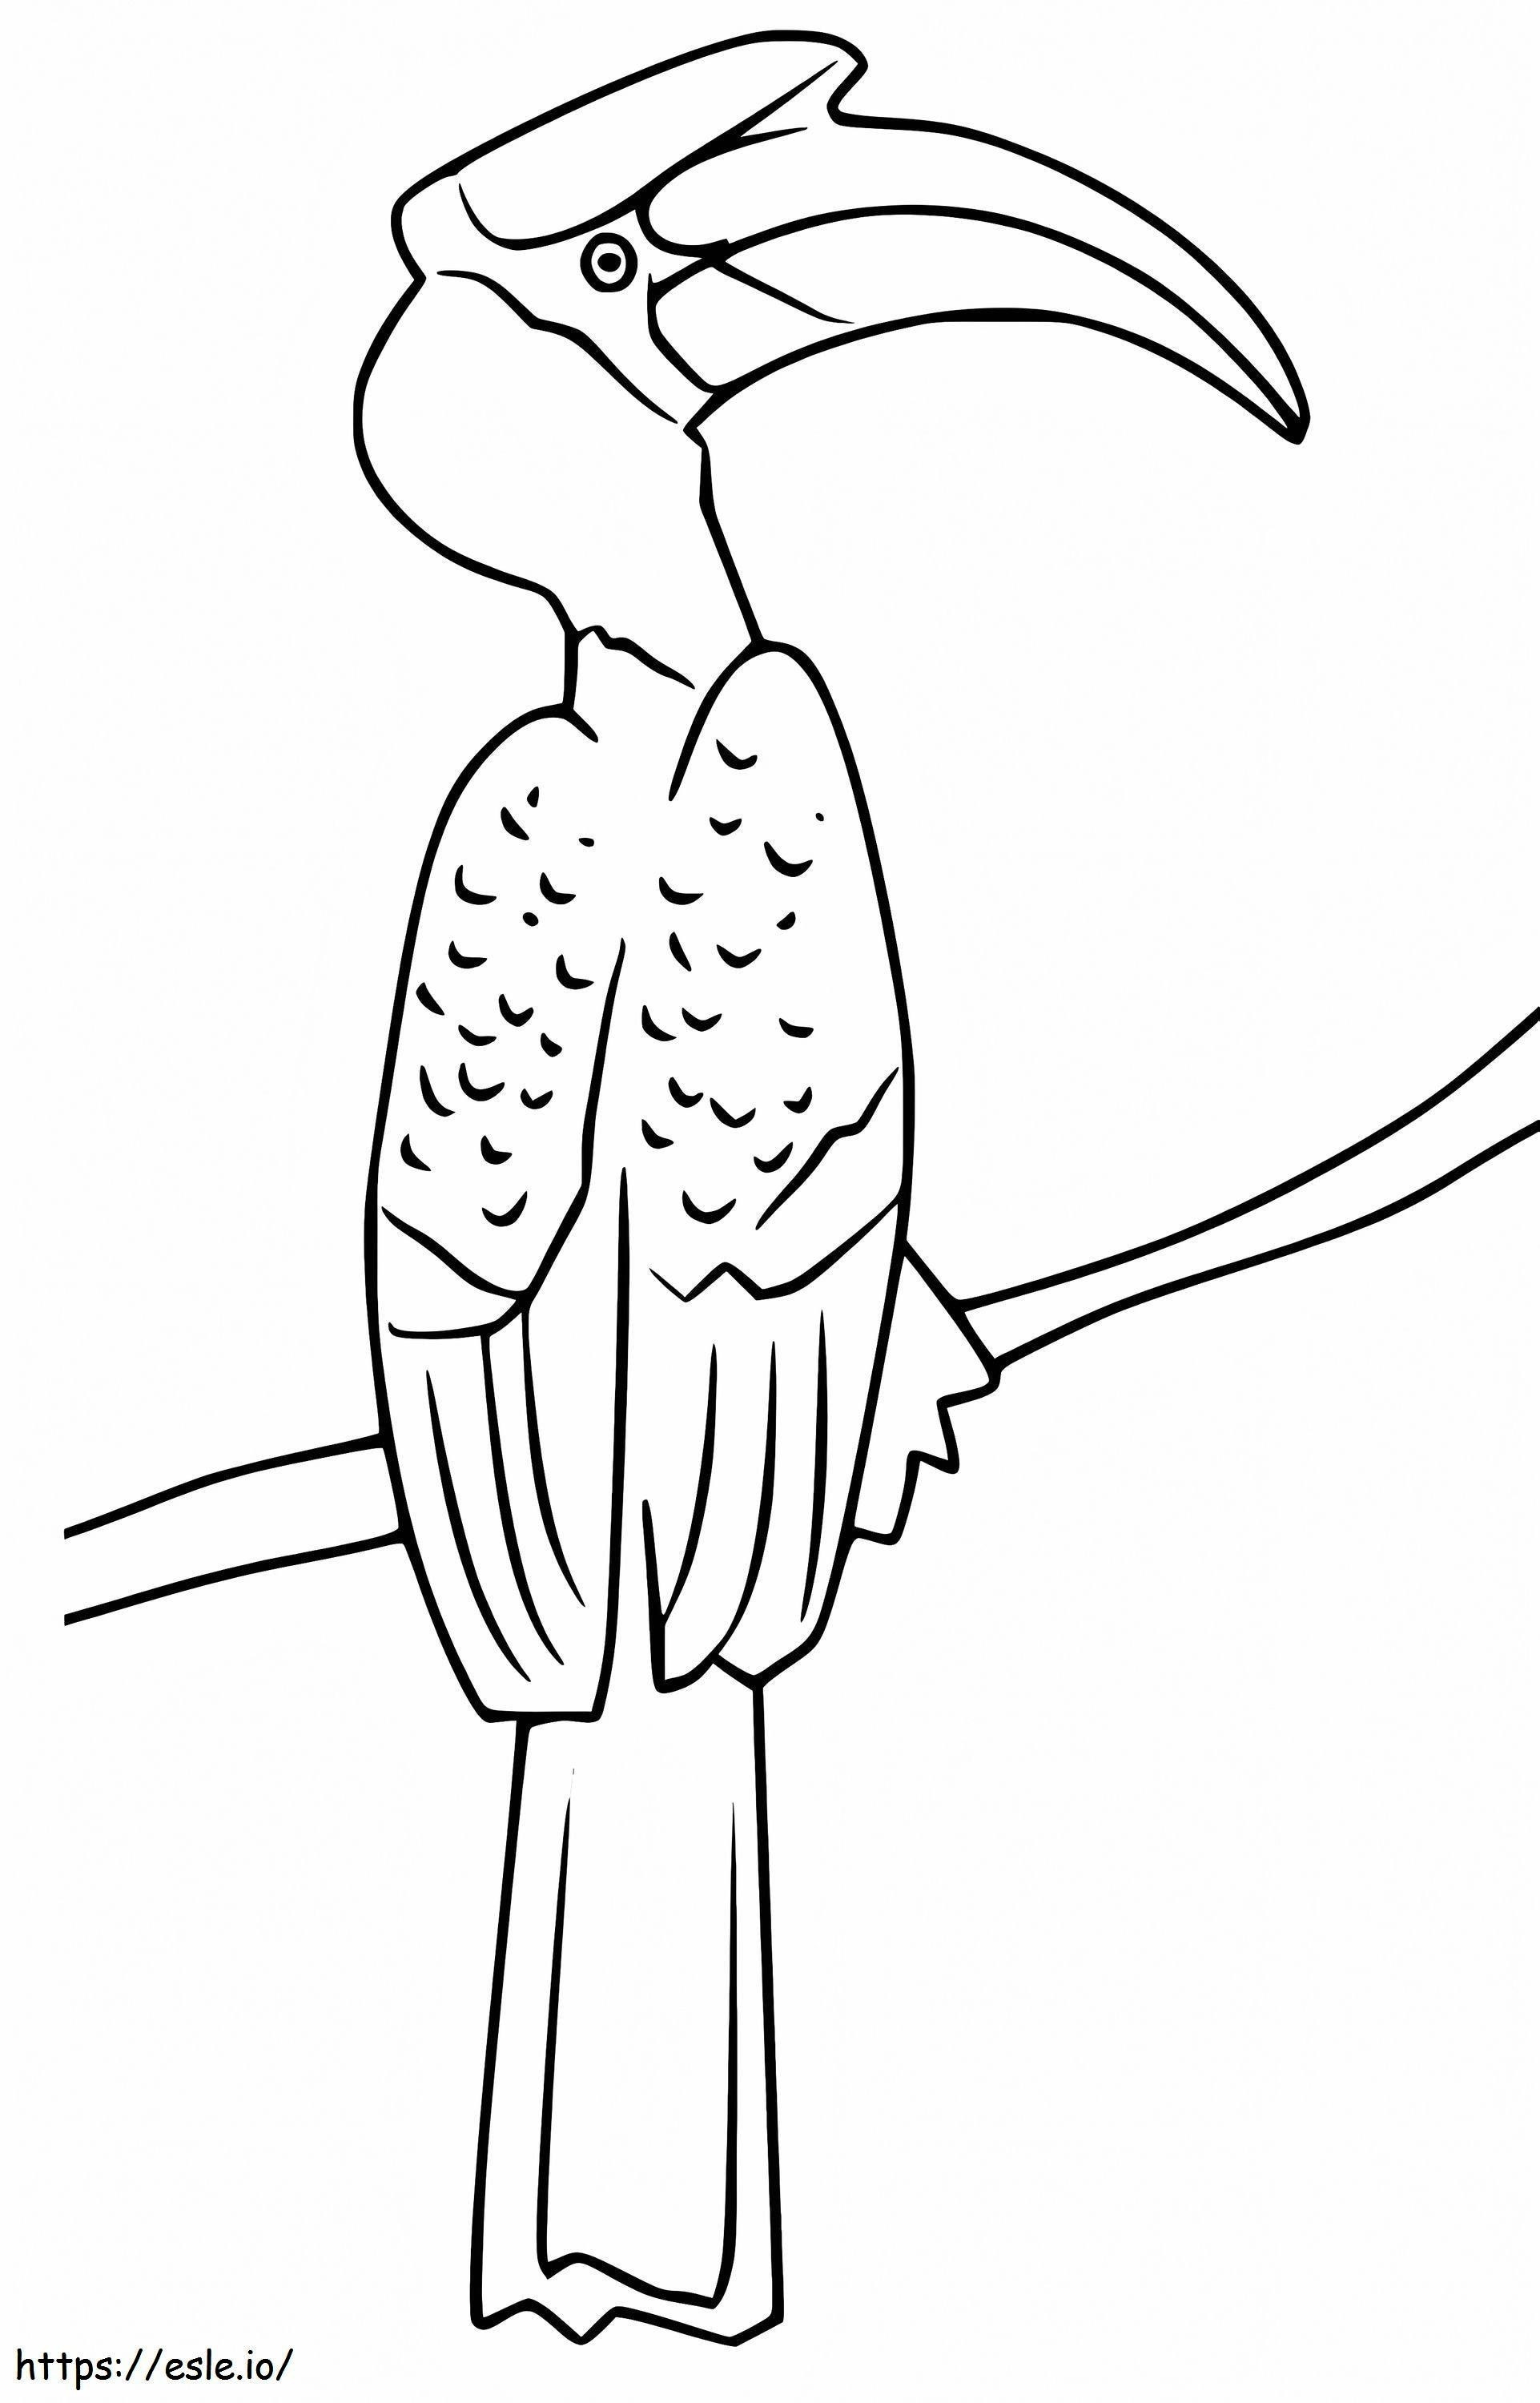 Hornbill On A Branch coloring page